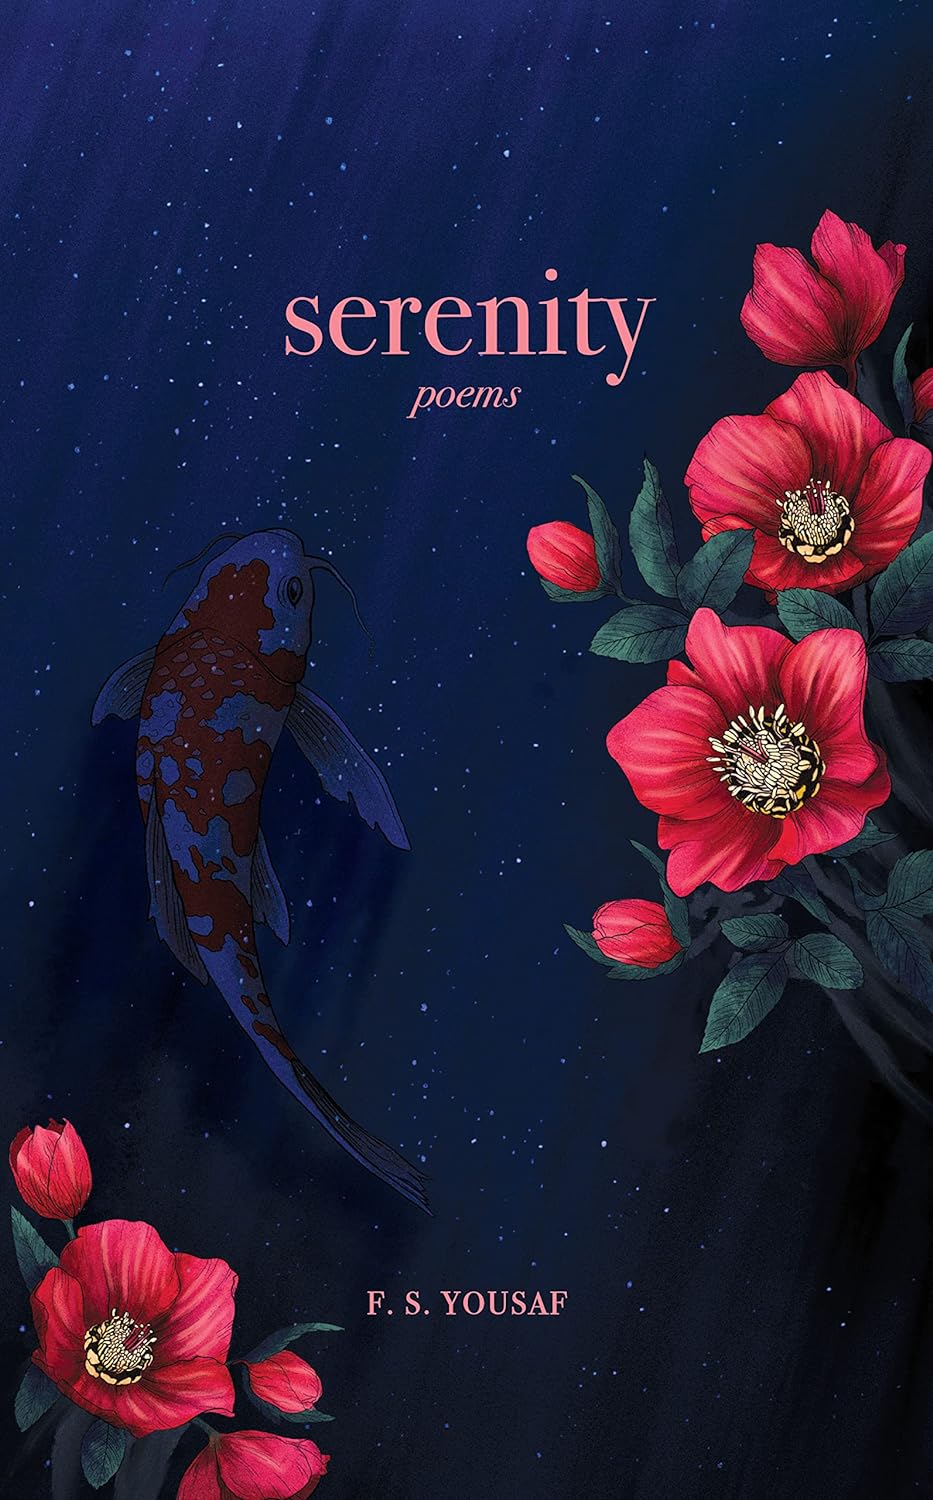 Serenity: Poems by F.S. Yousaf (Limited Edition)